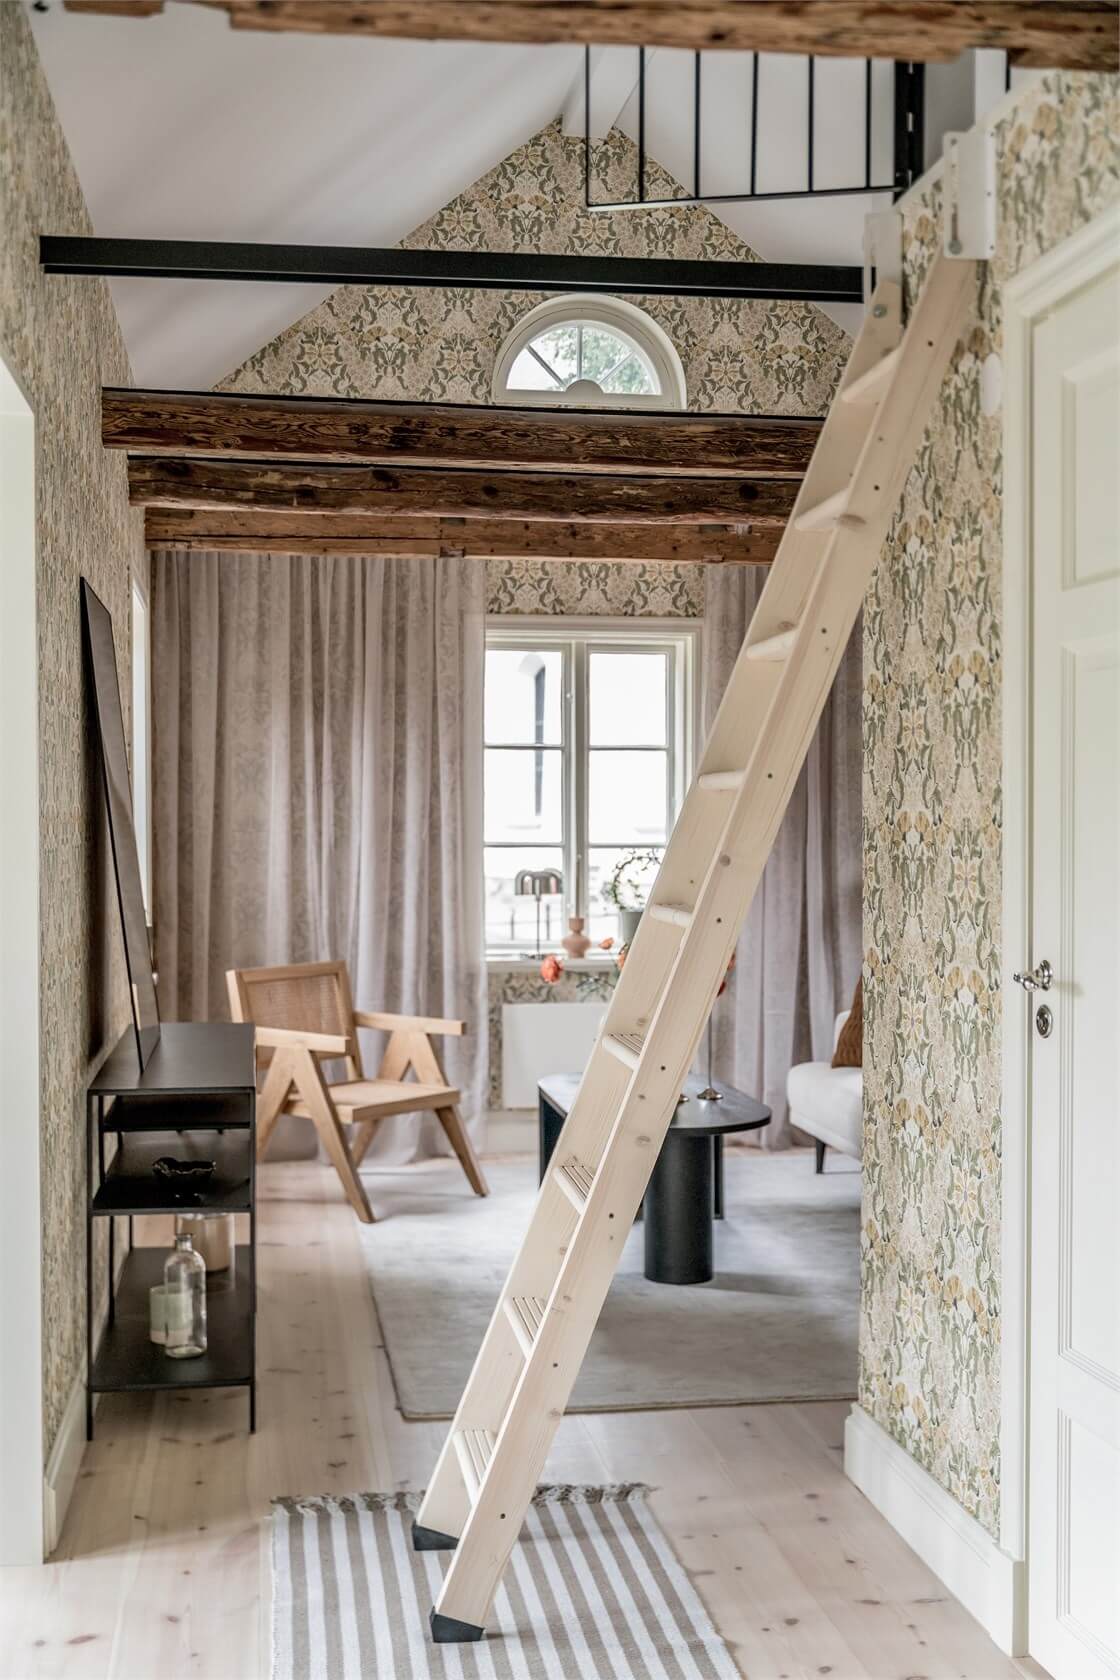 An Idyllic Small Swedish House with Wooden Beams